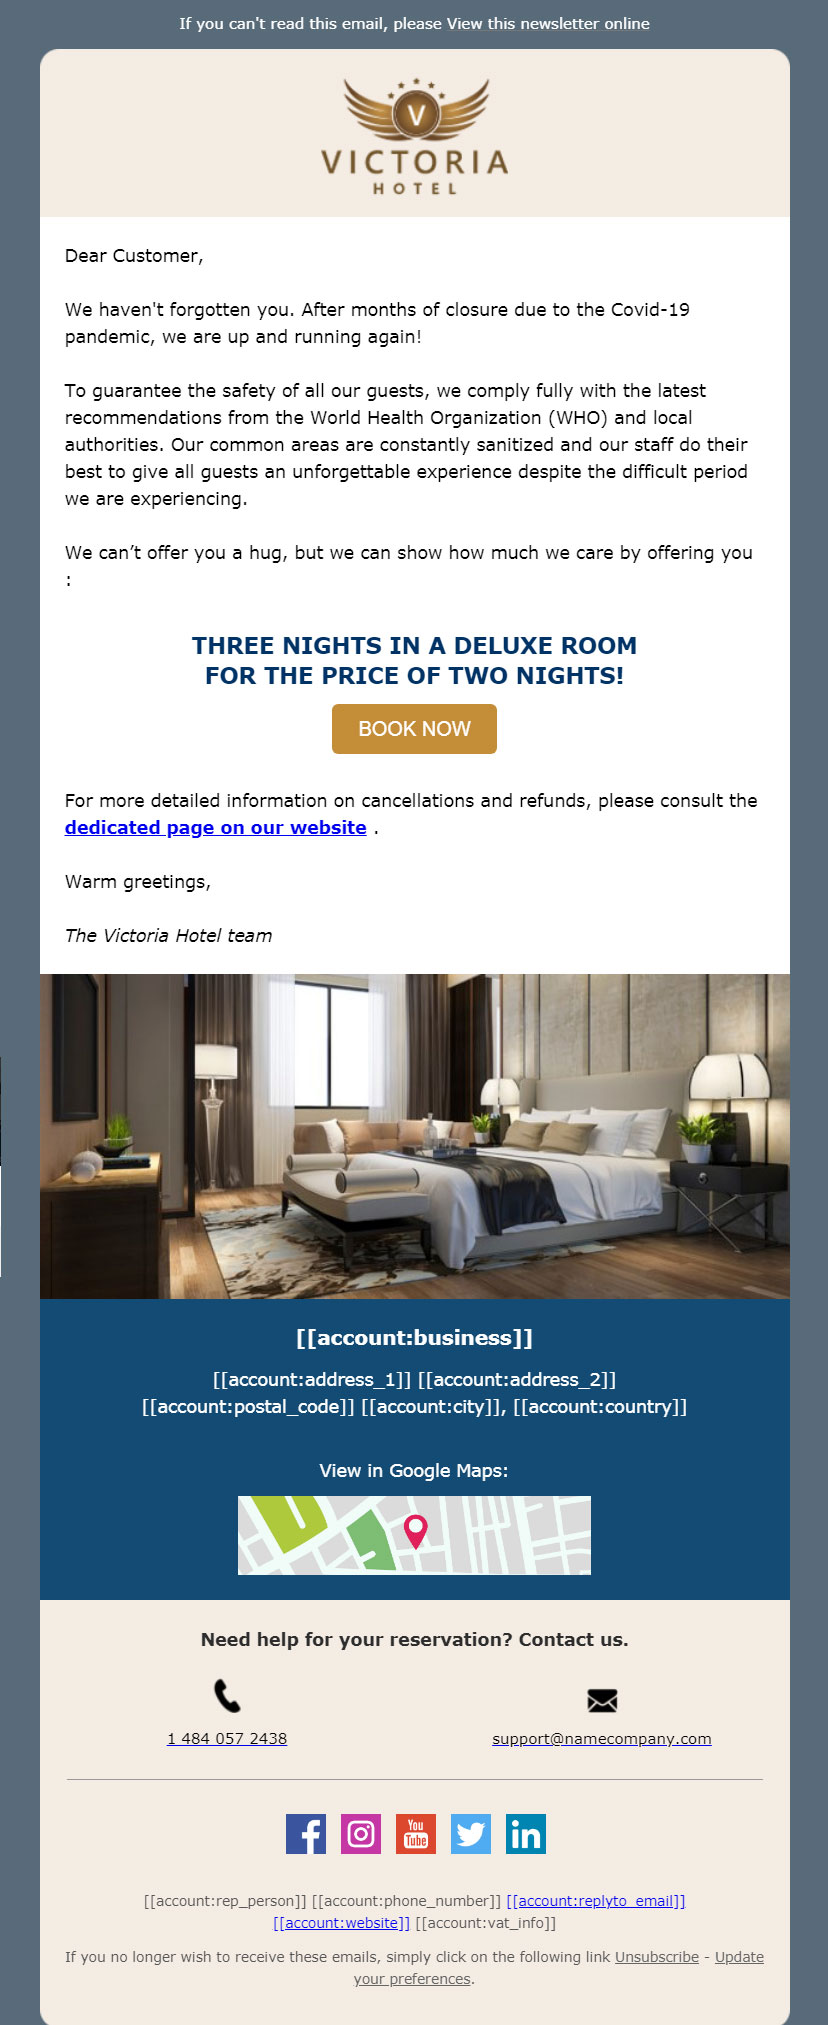 Email marketing for hotels after Covid-19